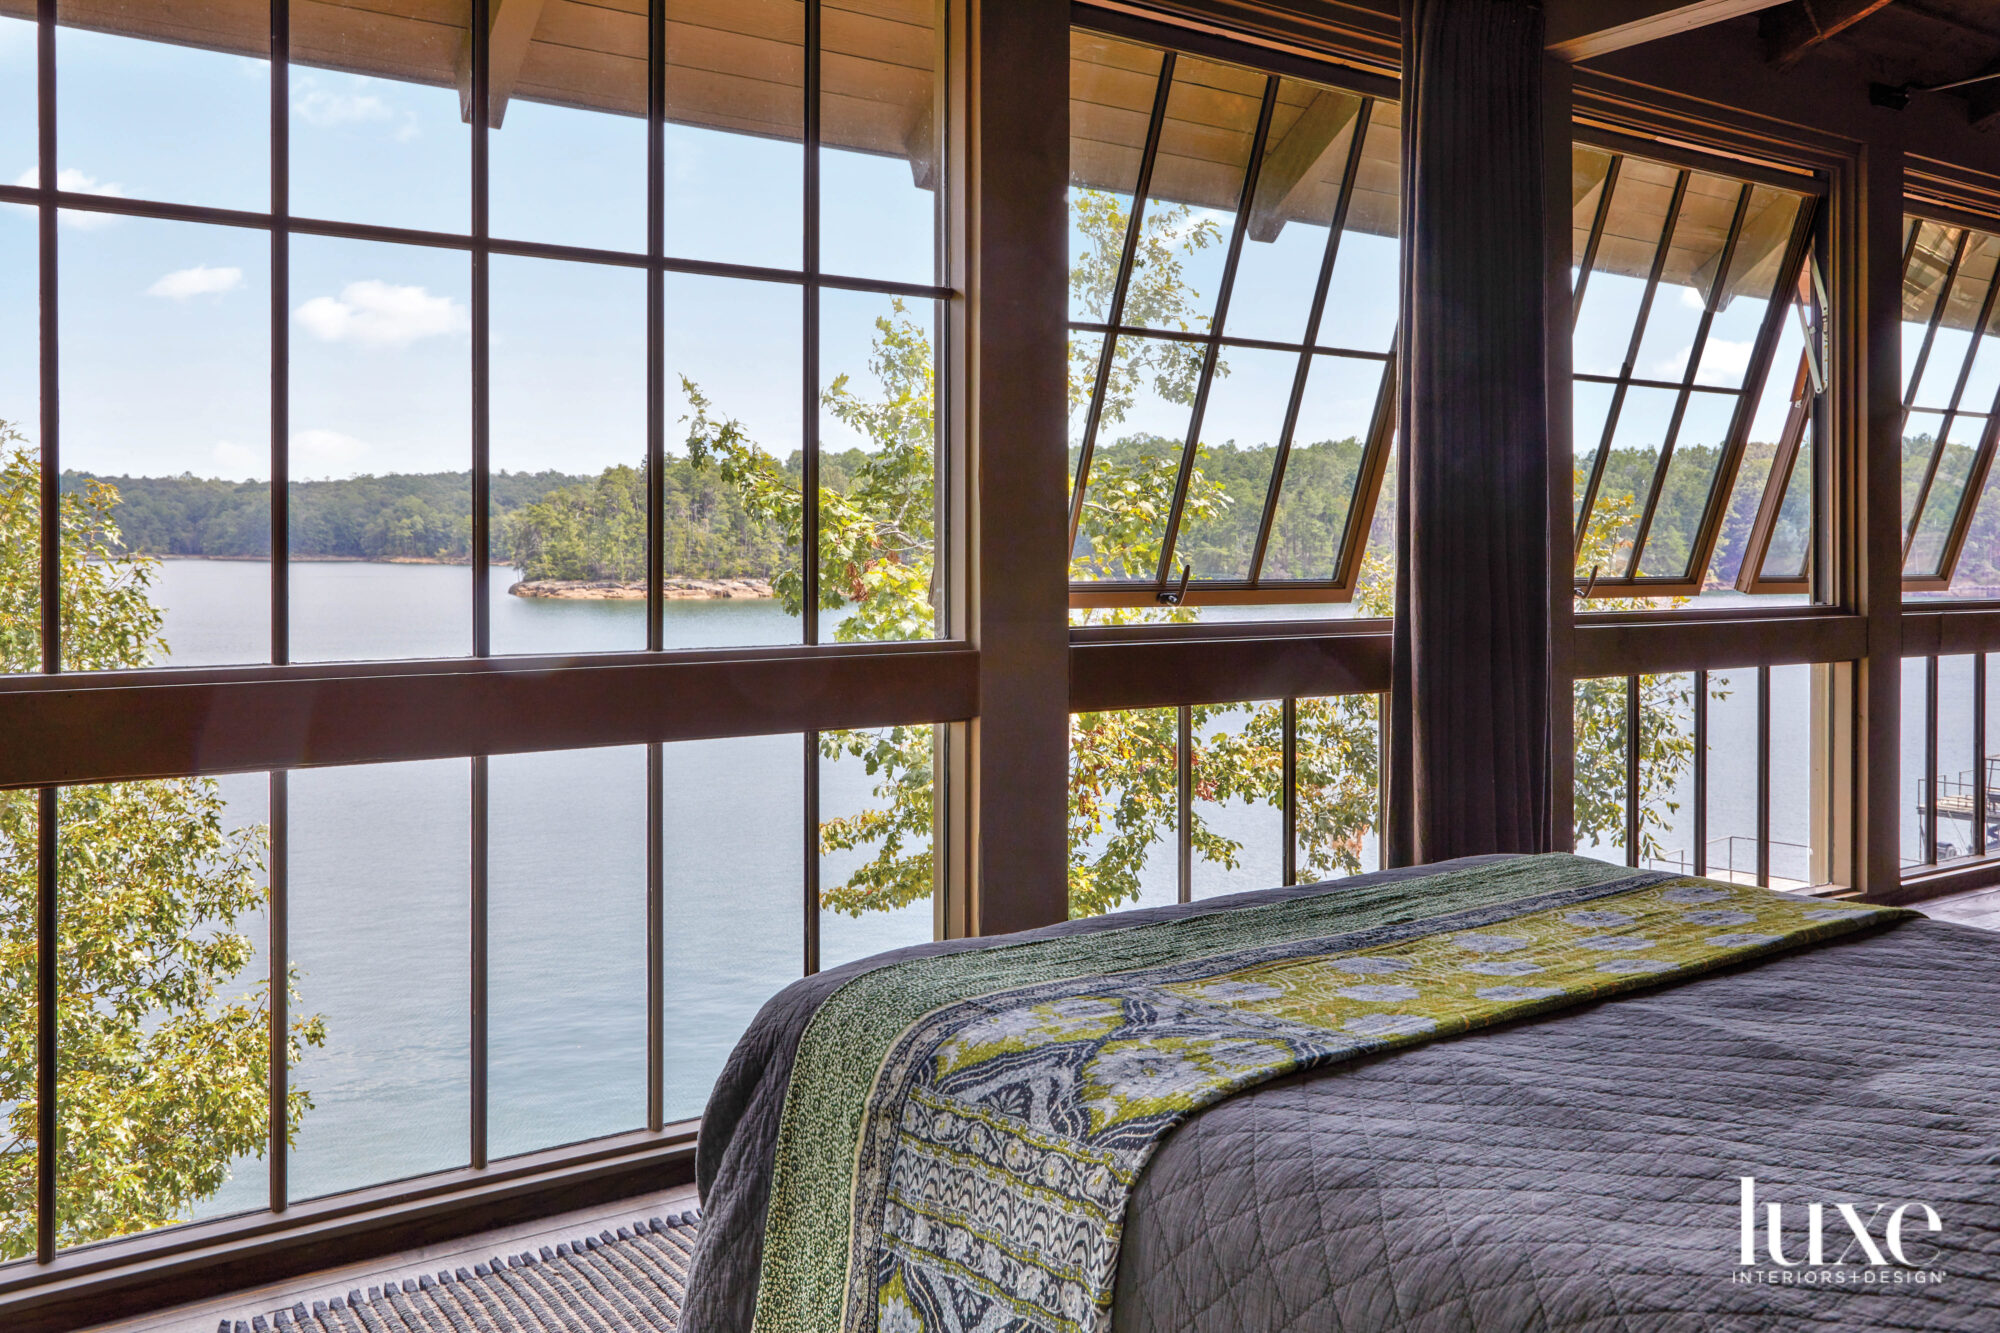 Edge of a bed looking out onto a bank of floor-to-ceiling windows with tilt-out casements revealing views of a placid lake